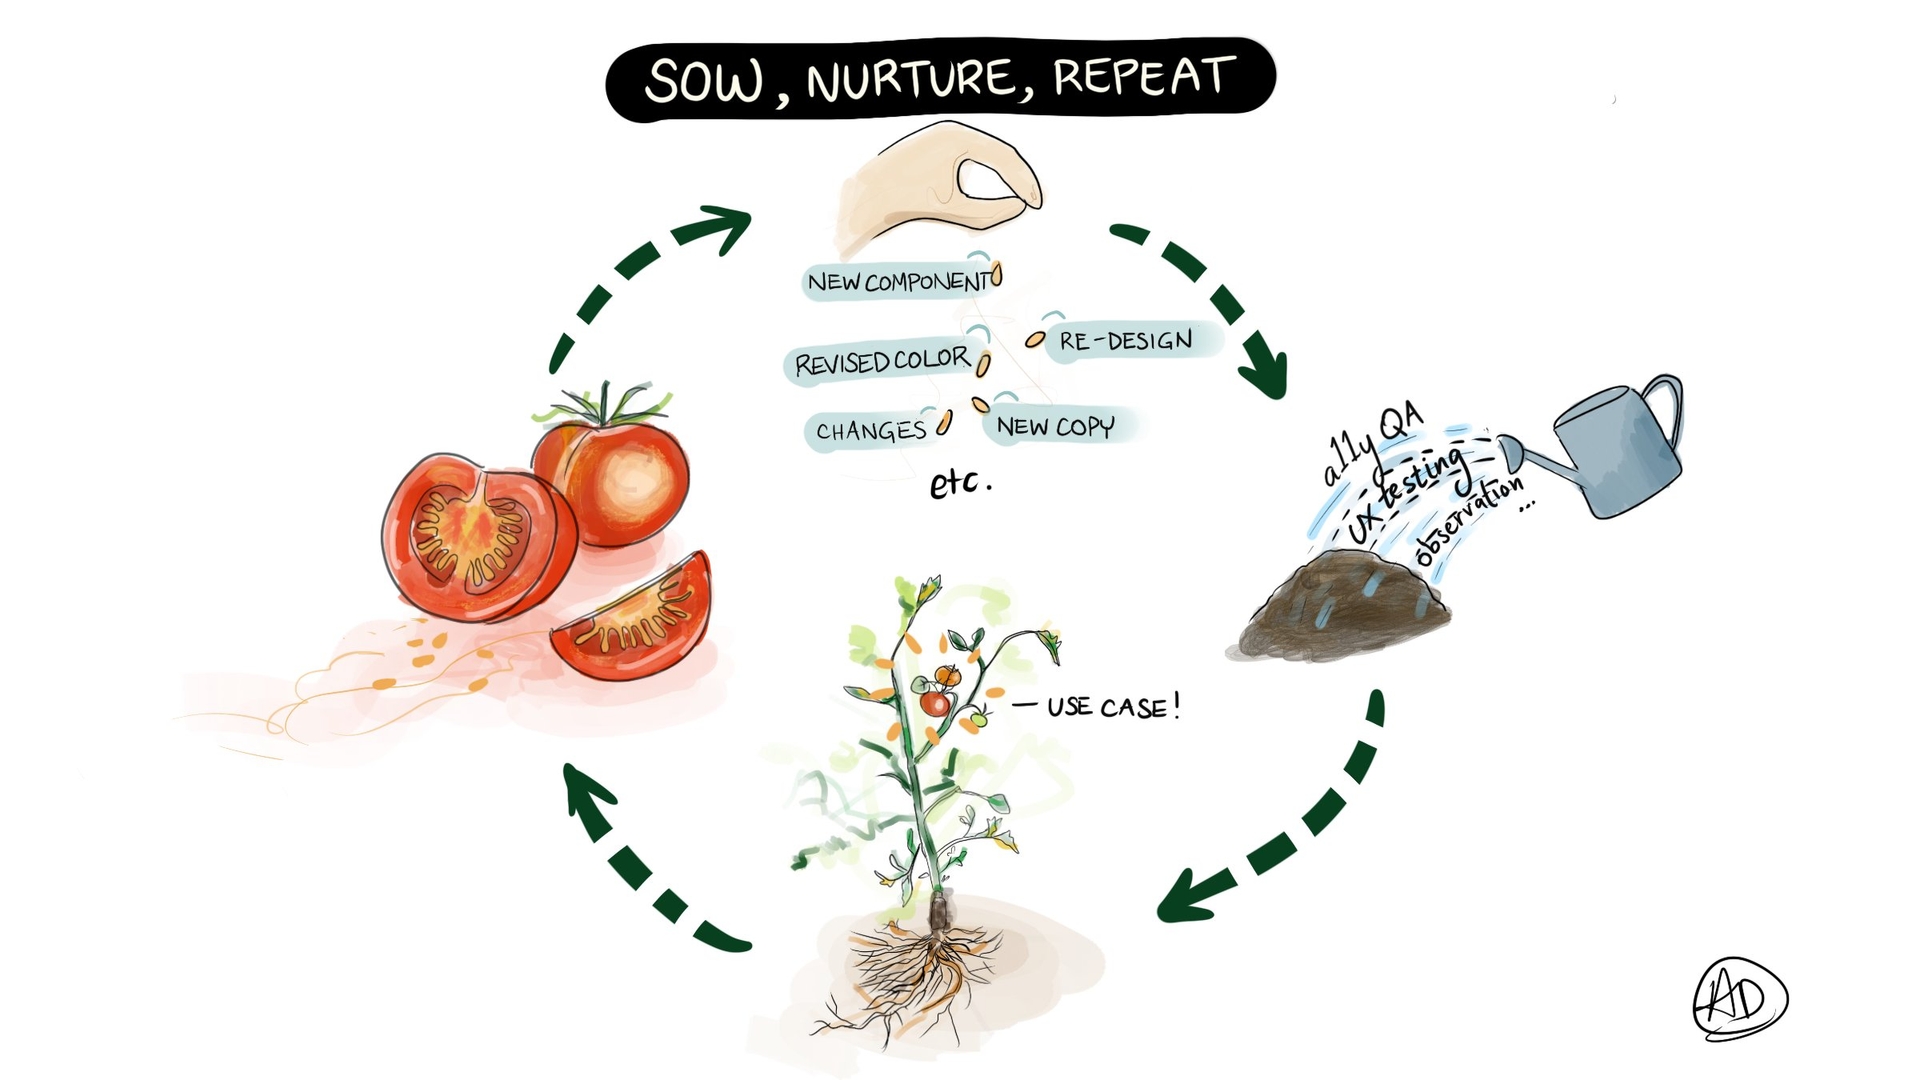 An image of a community garden that says "sow, nurture, repeat" from a tweet by Aletheia Délivré